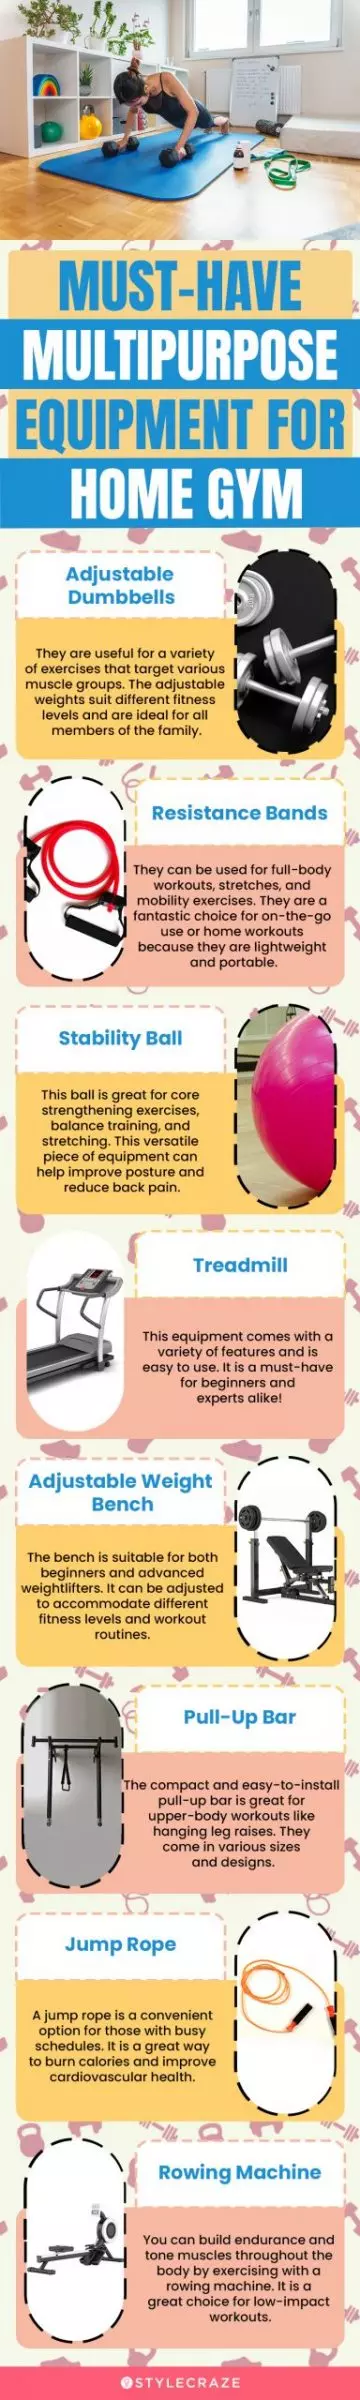 Must-Have Multi-Purpose Equipment For Home Gym (infographic)